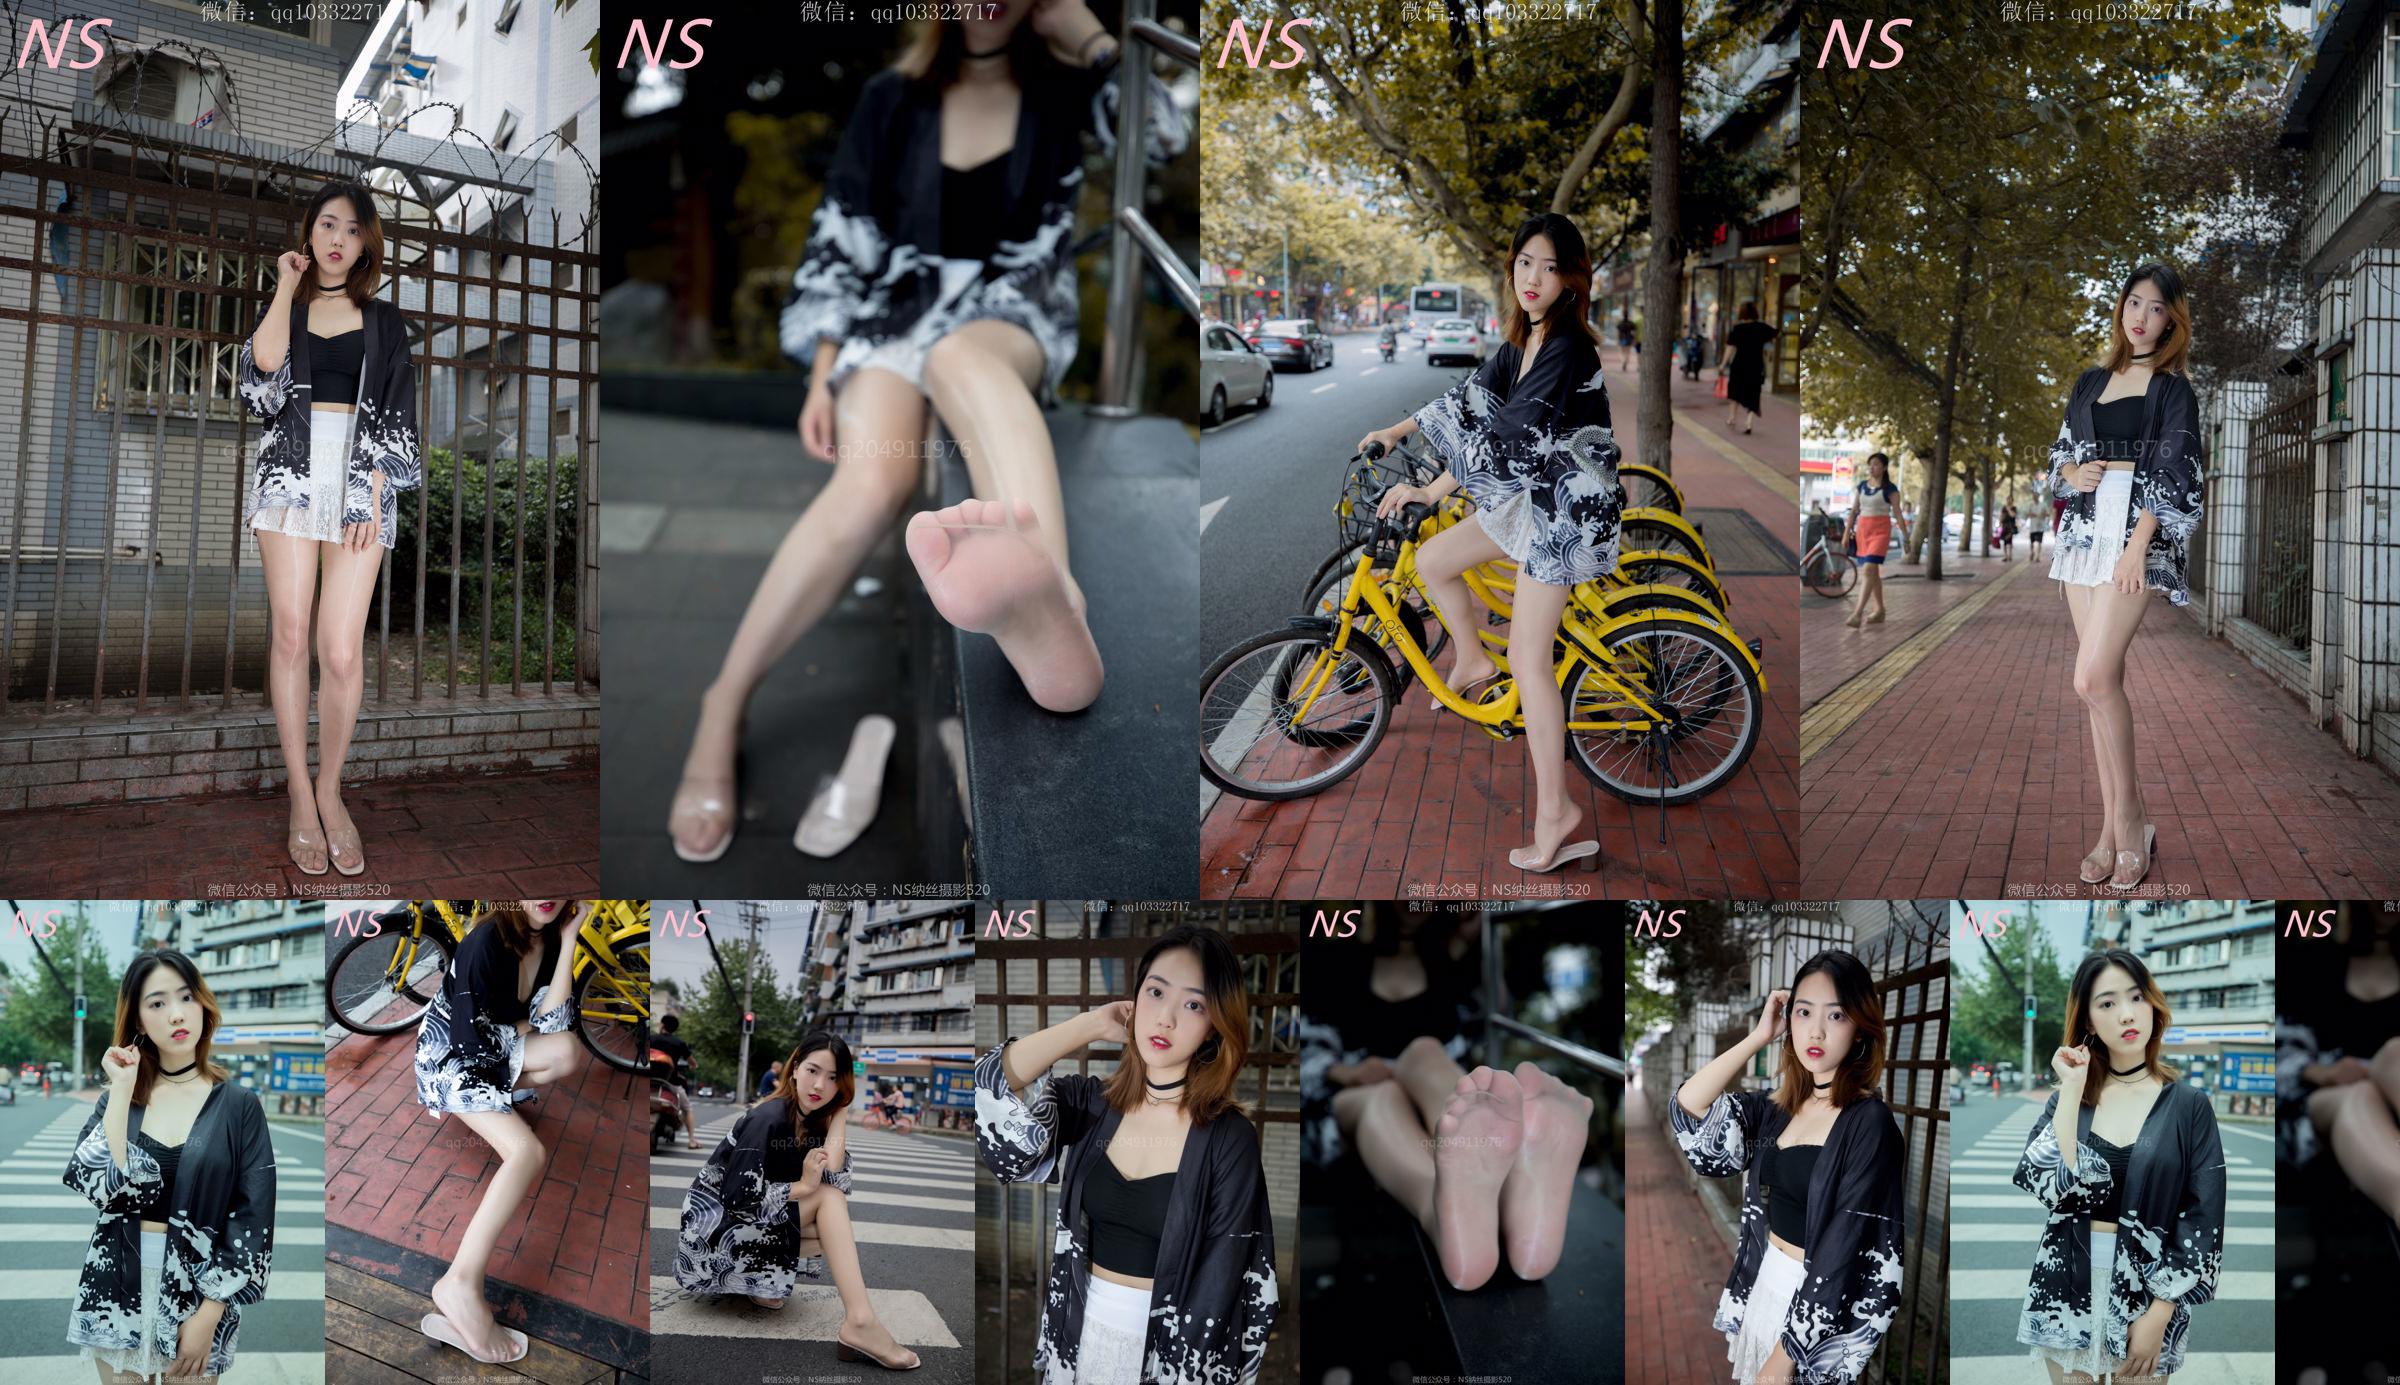 Man Wen "A Trip to a Tricycle in Flesh-colored Stockings and Beautiful Legs" [Nass Photography] No.e4b717 Page 14